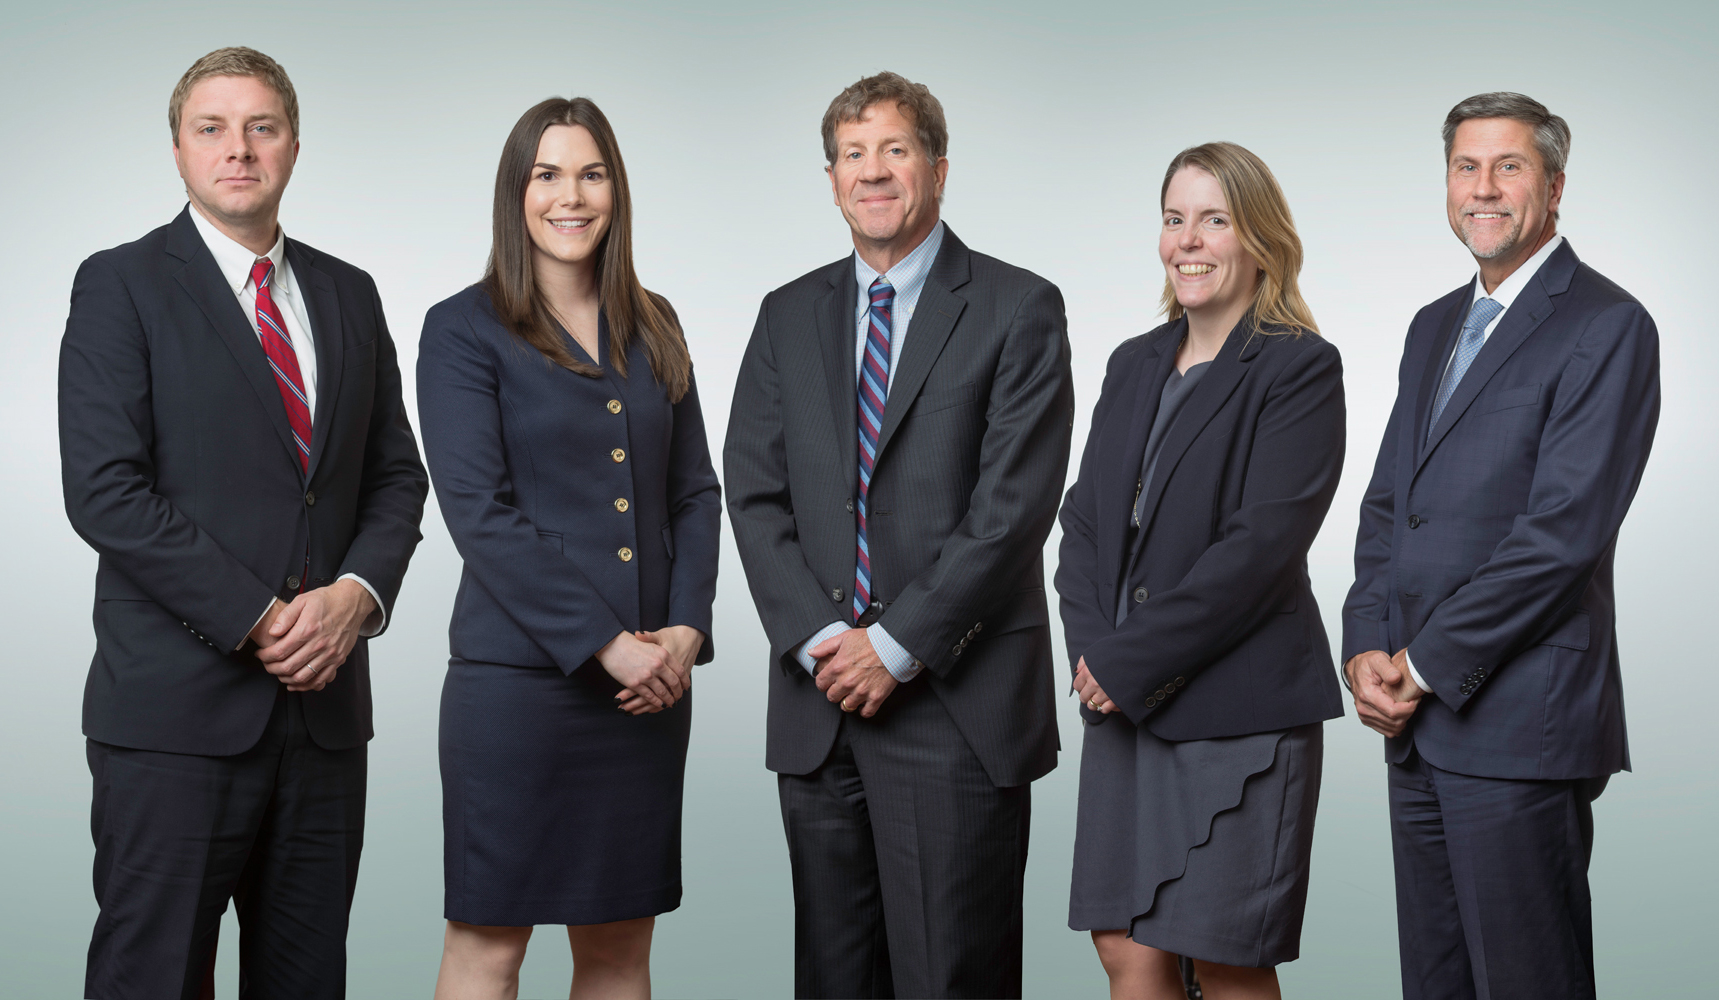 Group Photo Of Professionals At Coughlin & Gerhart LLP